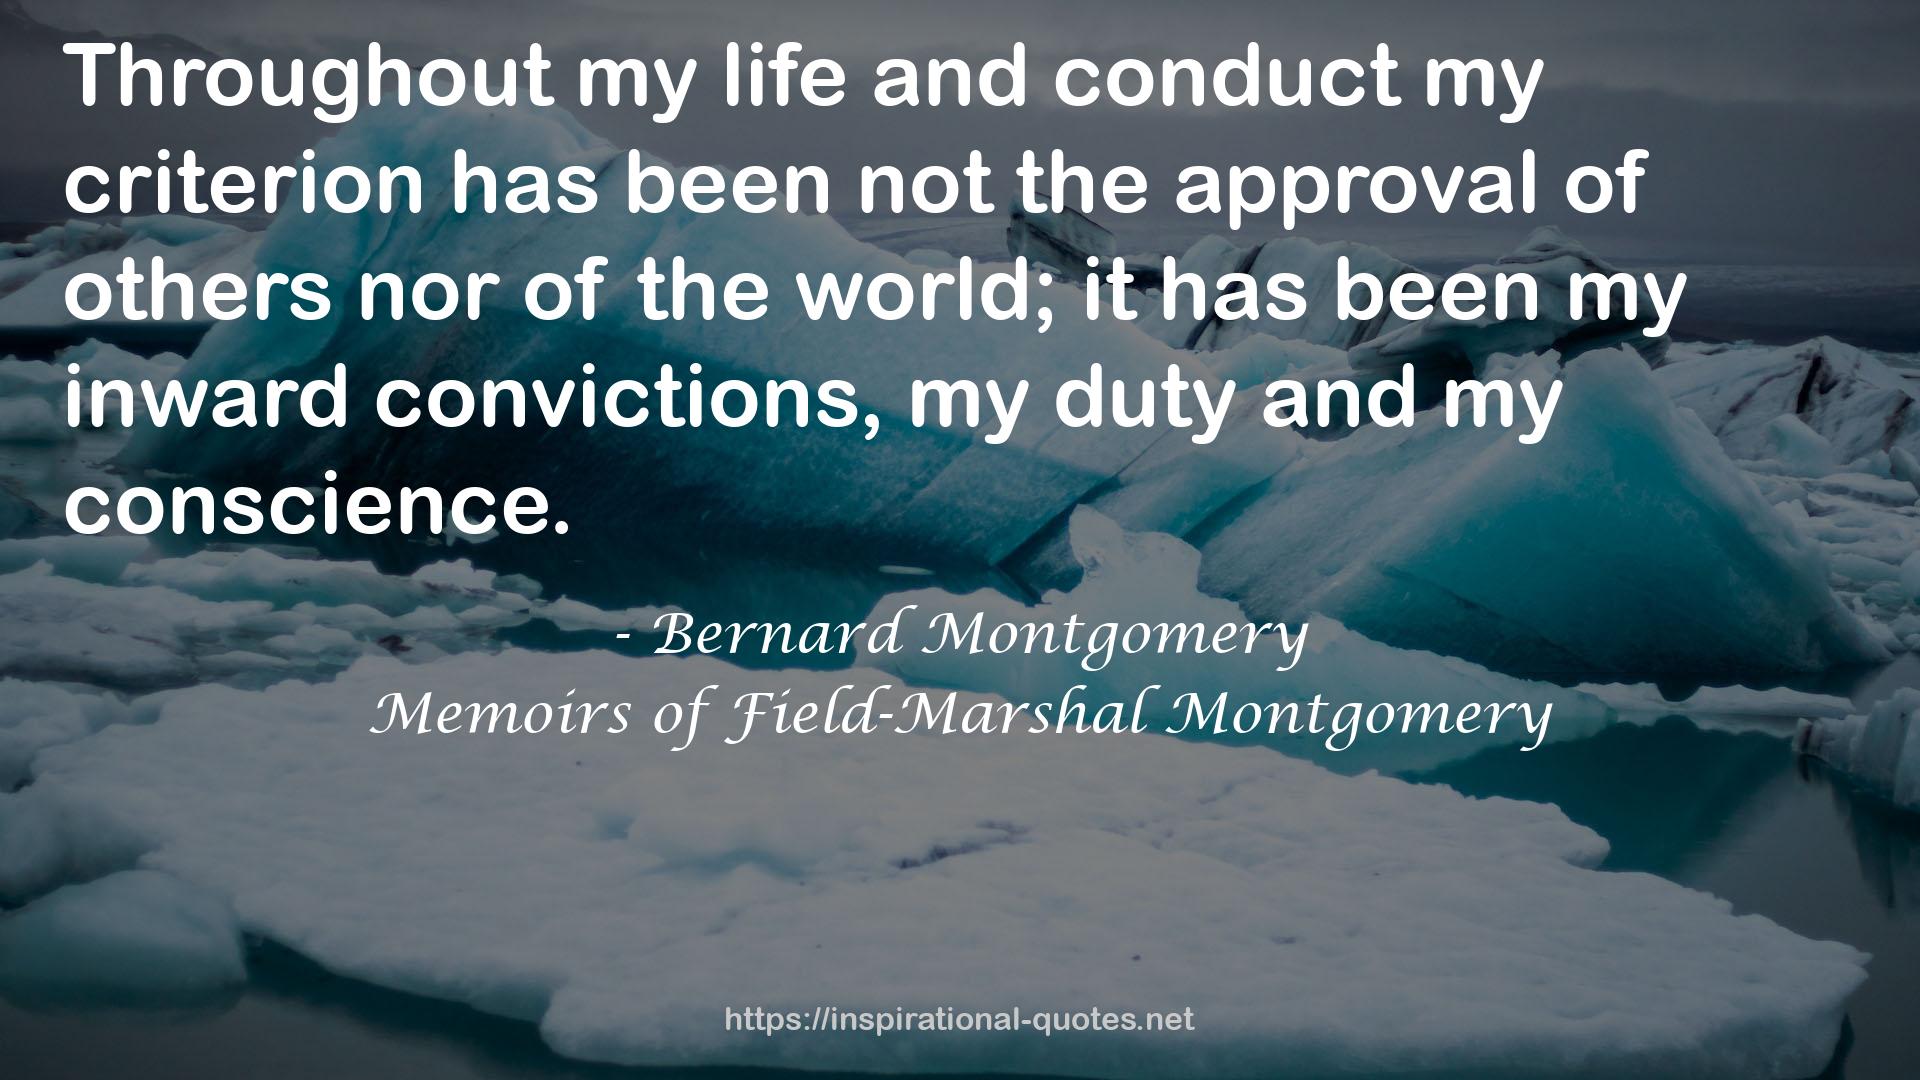 Memoirs of Field-Marshal Montgomery QUOTES